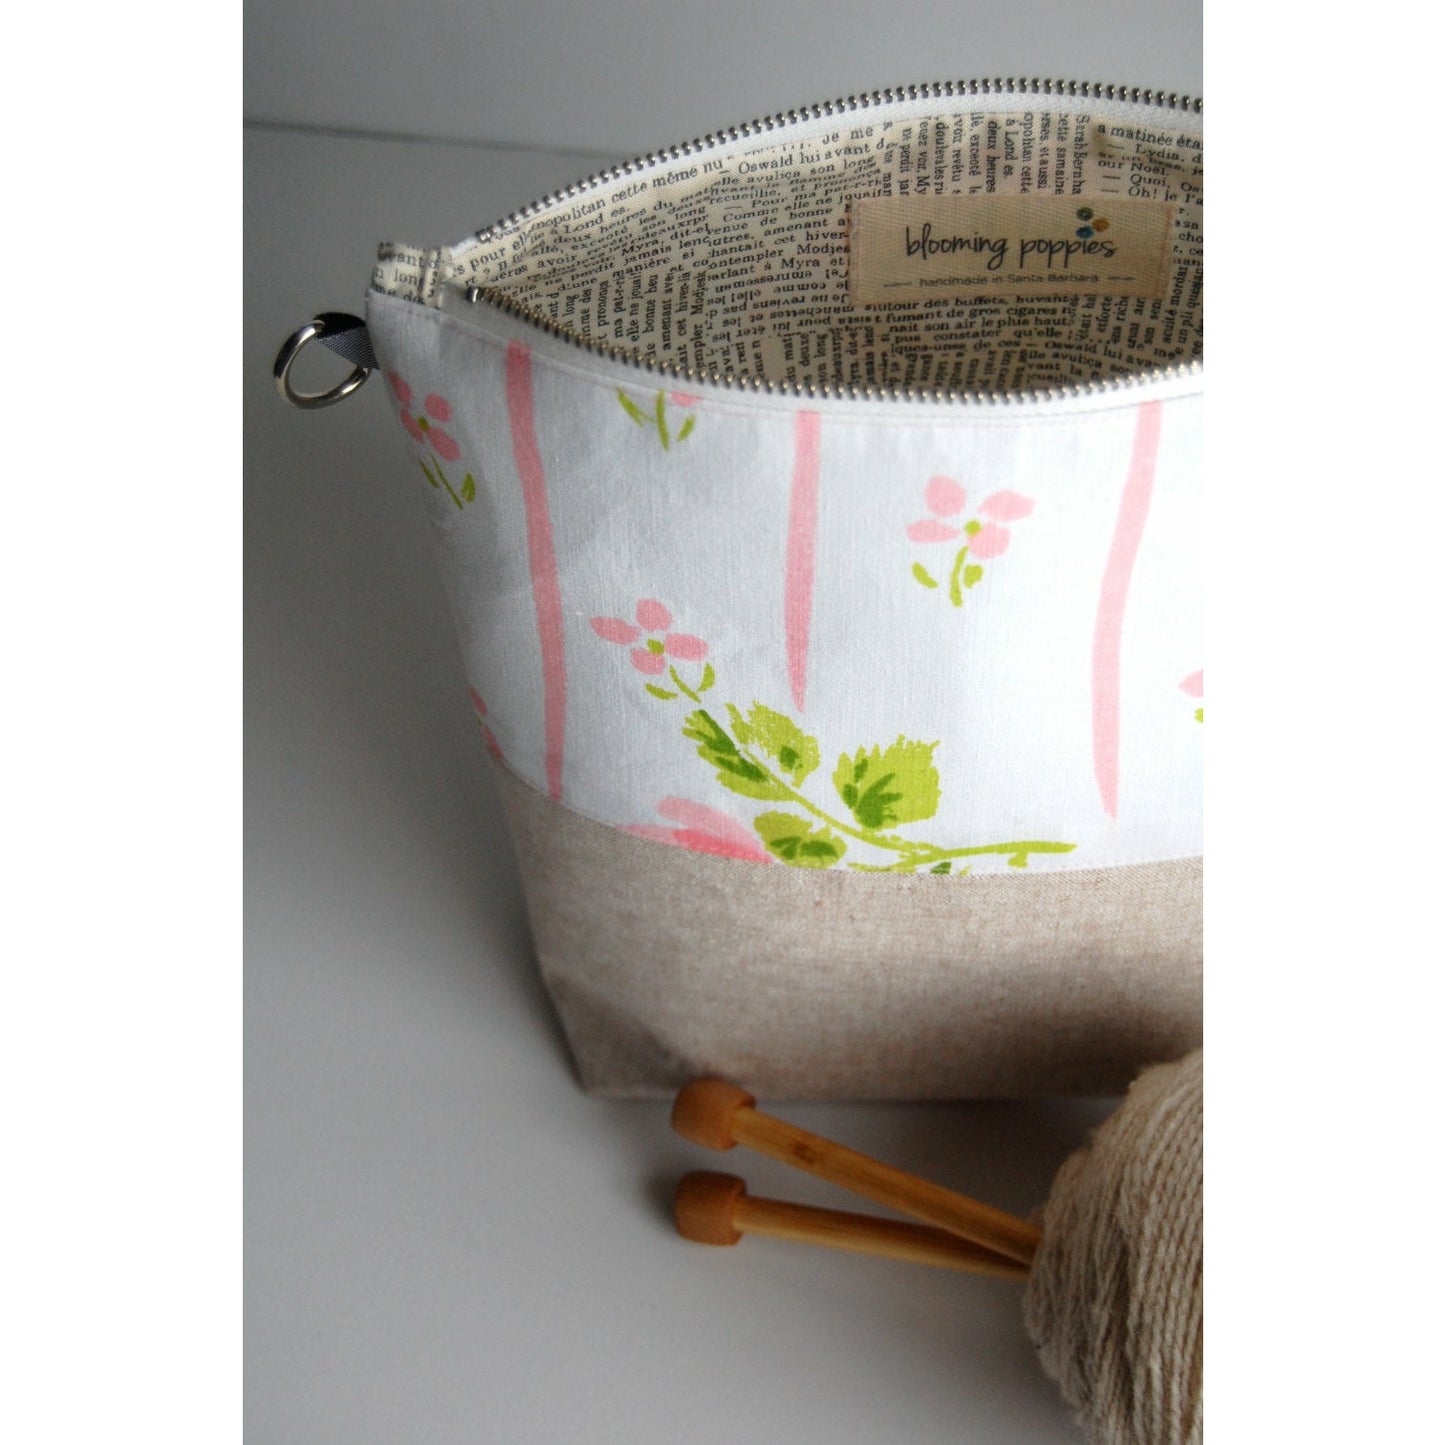 Project Bag, Knitting Bag, Medium Size Vintage and Linen, Spring Inspired Bag with YKK Metal Zipper- THE LORETTA